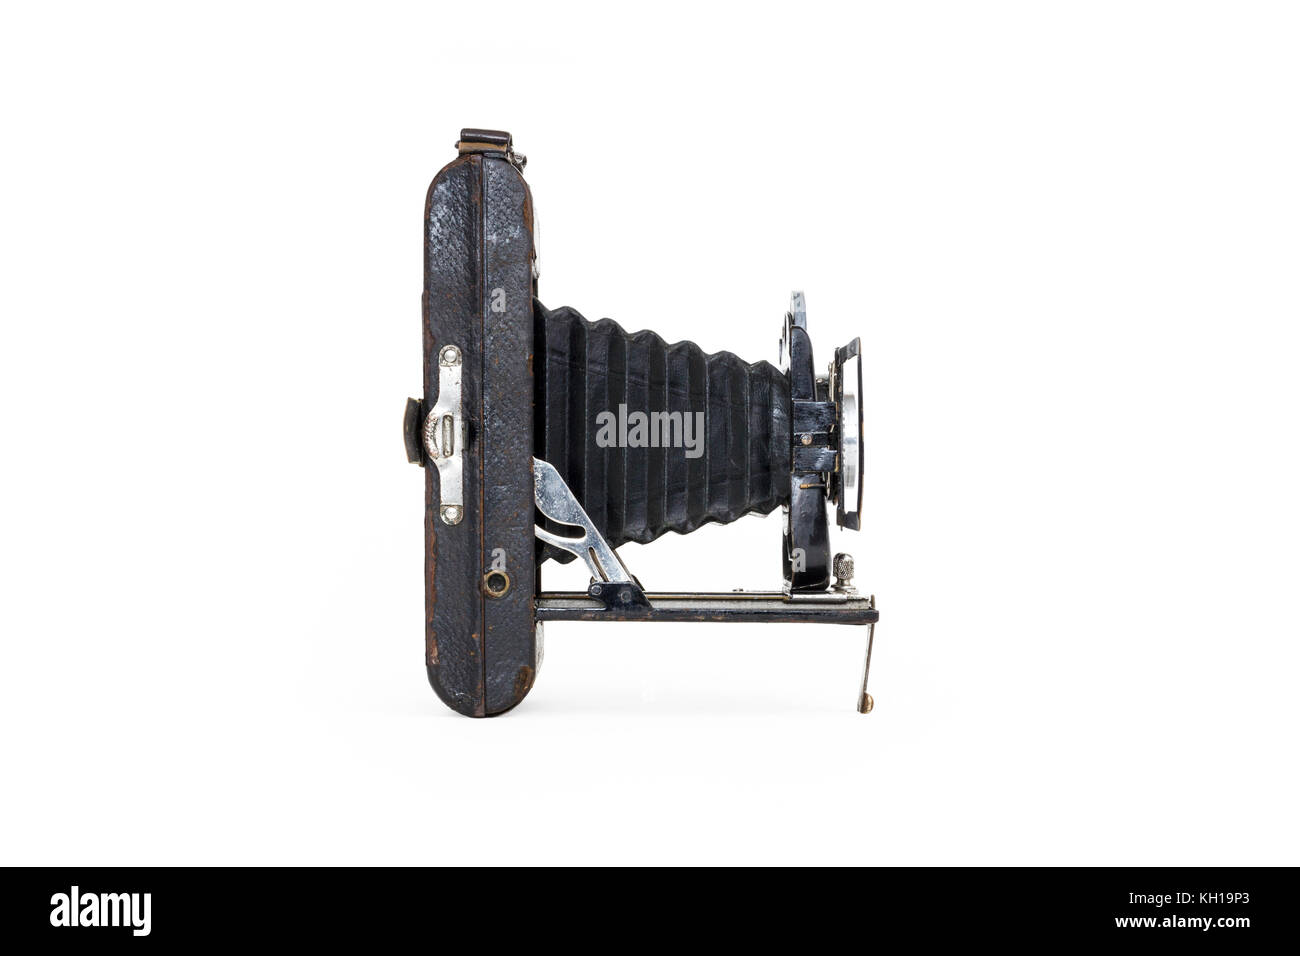 Early 20th Century Butchers Watch Pocket Carbine 120 roll film camera, 1910-1920, isolated against a white background Stock Photo